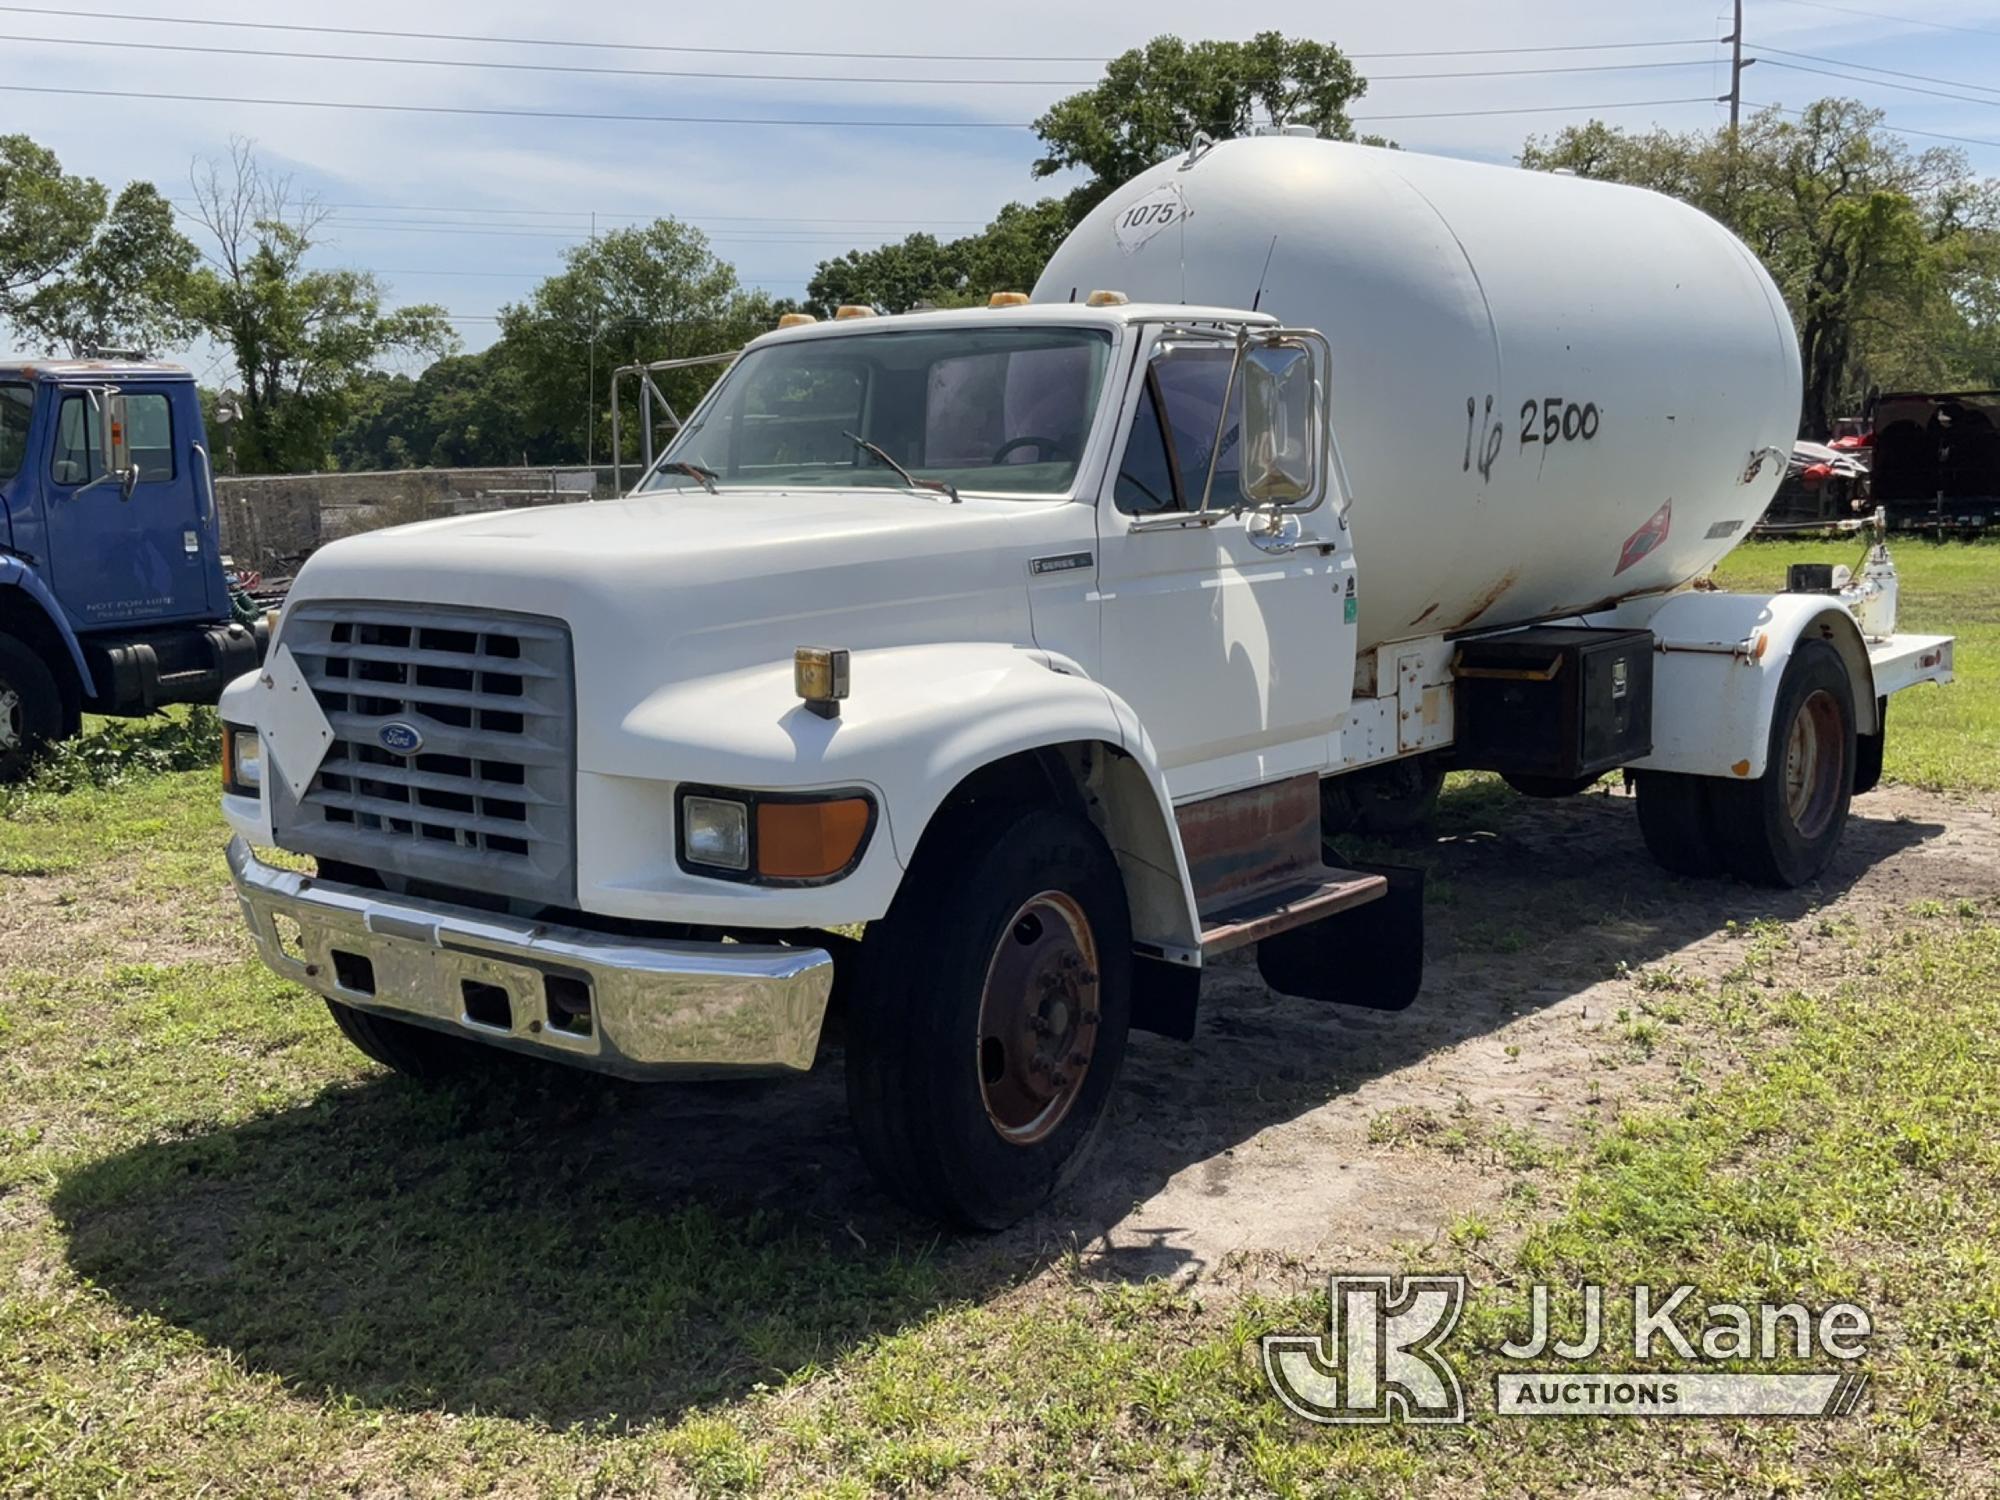 (Tampa, FL) 1997 Ford F700 Tank Truck, Tank has been Purged Clean Not Running, Turns Over, Will Not